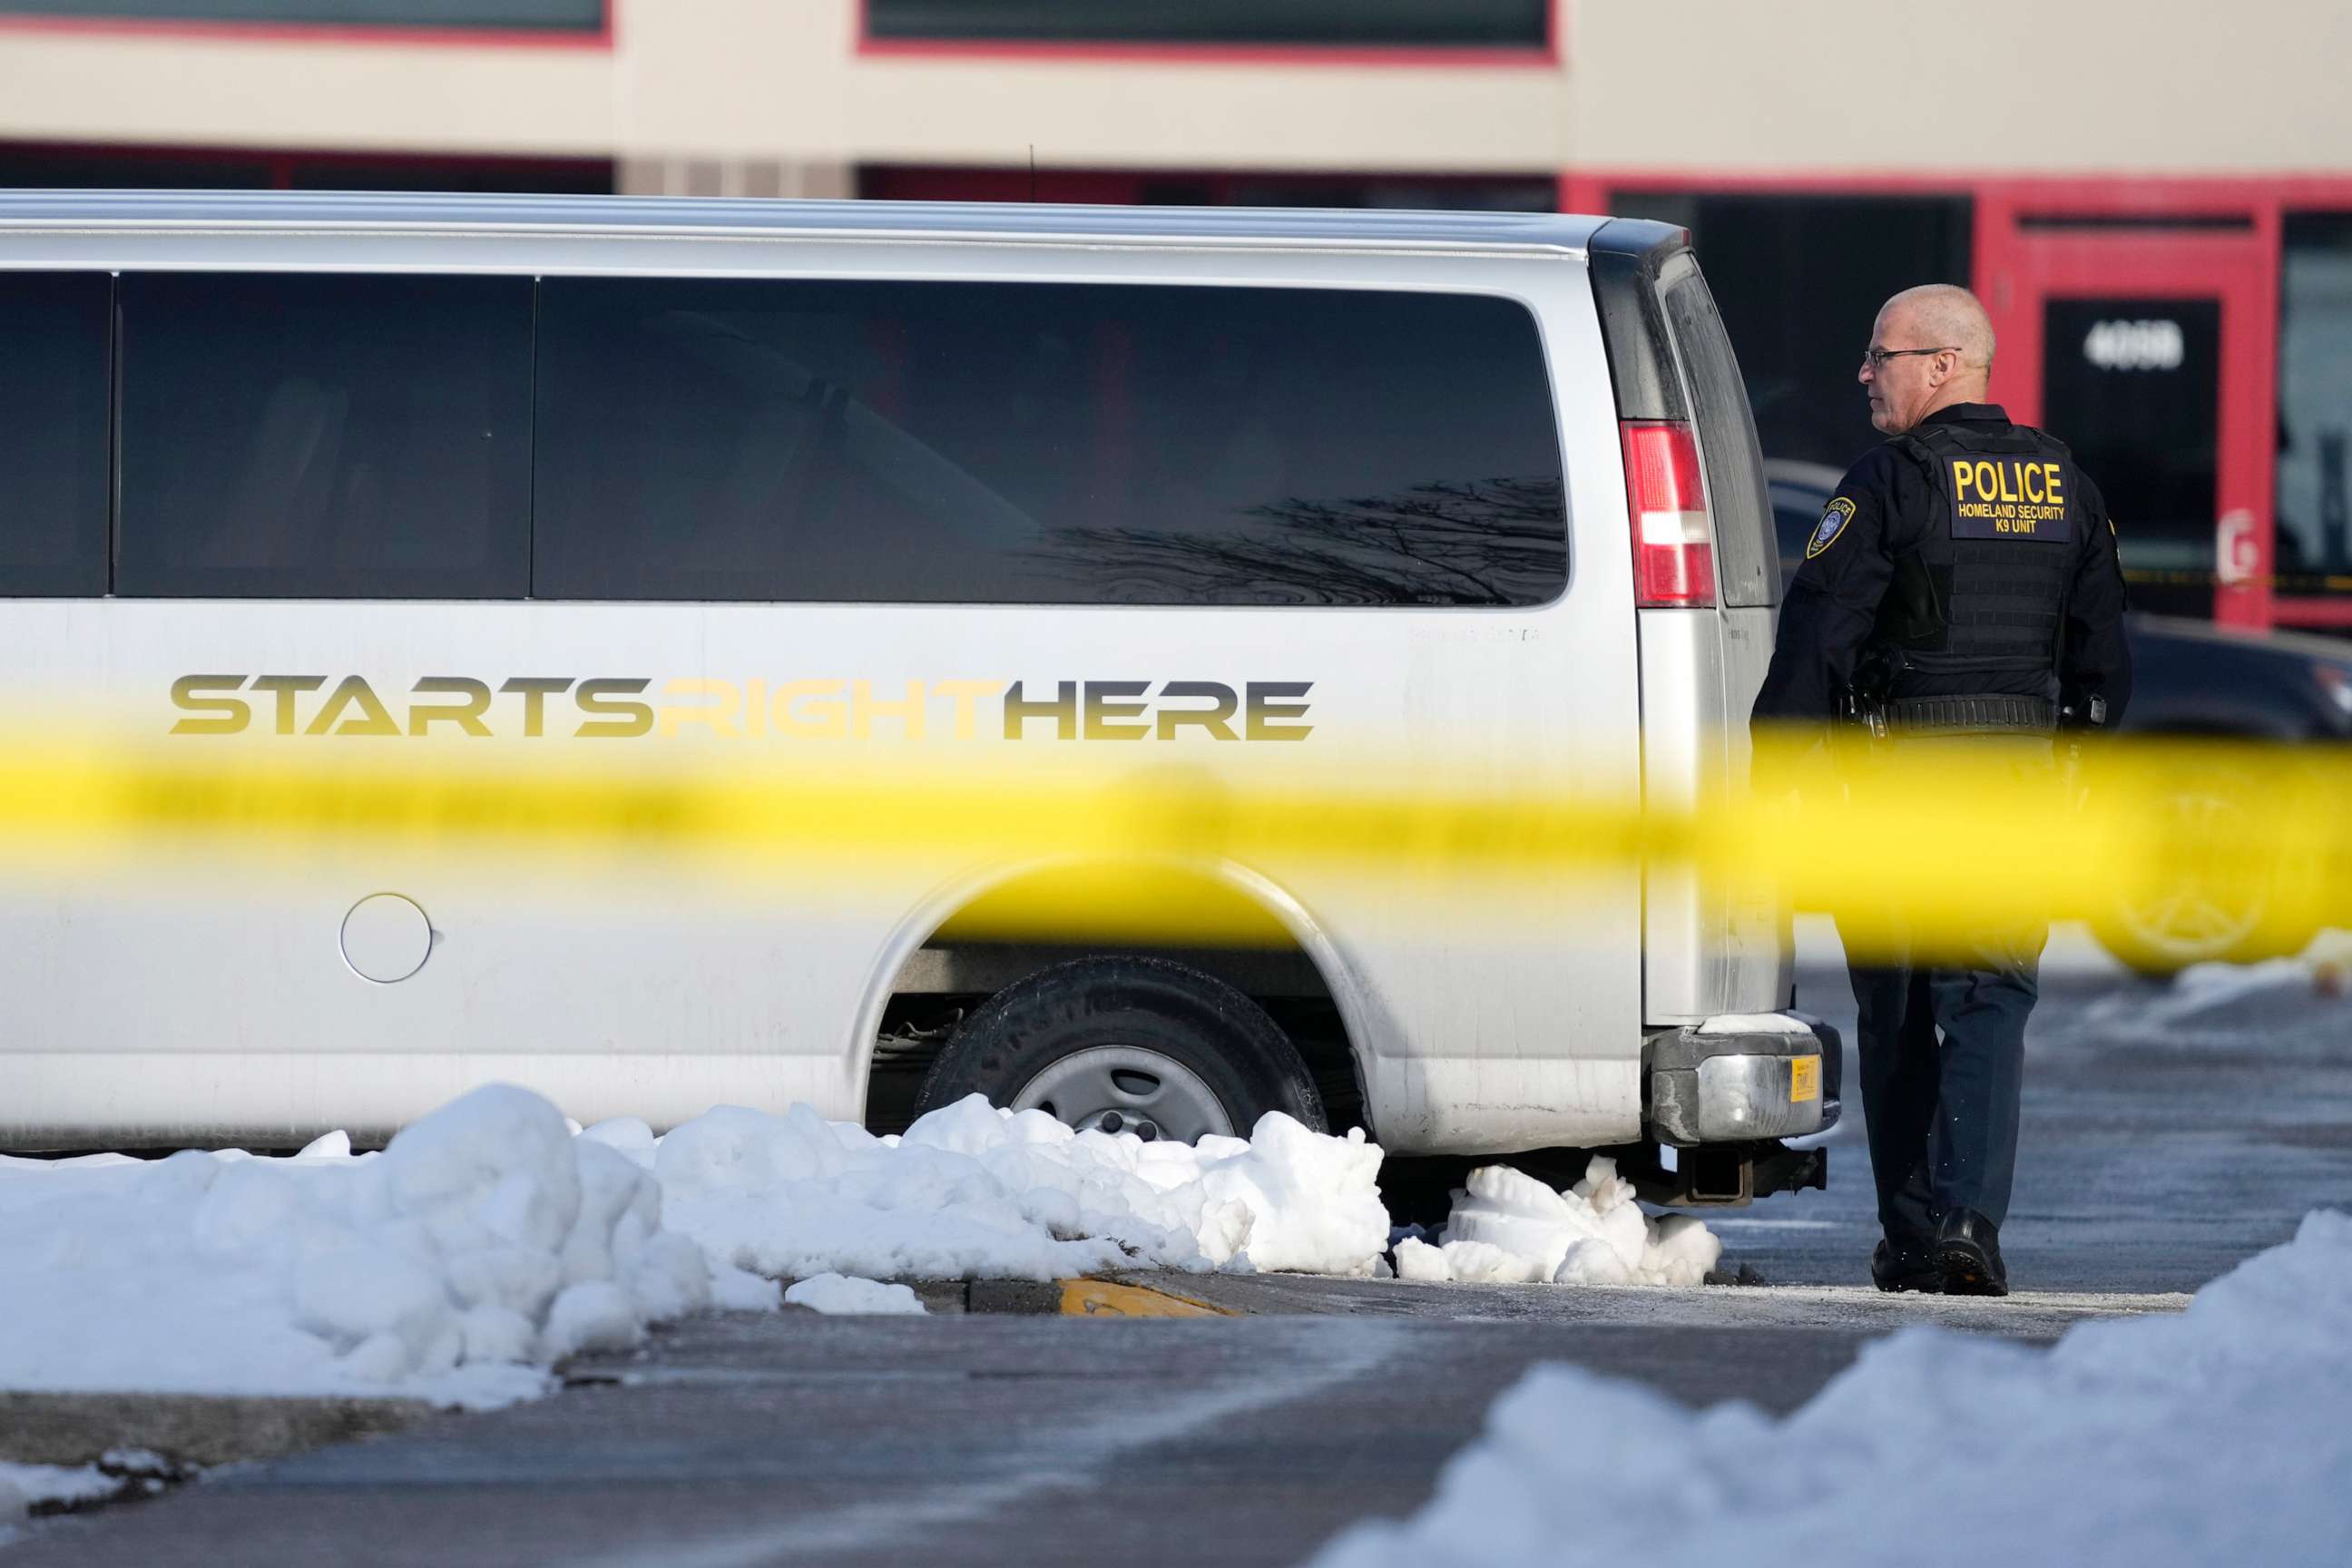 PHOTO: A law enforcement officer walks outside the Starts Right Here building, Jan. 23, 2023, in Des Moines, Iowa. Police say two students were killed and a teacher was injured in a shooting at the Des Moines school on the edge of the city's downtown.